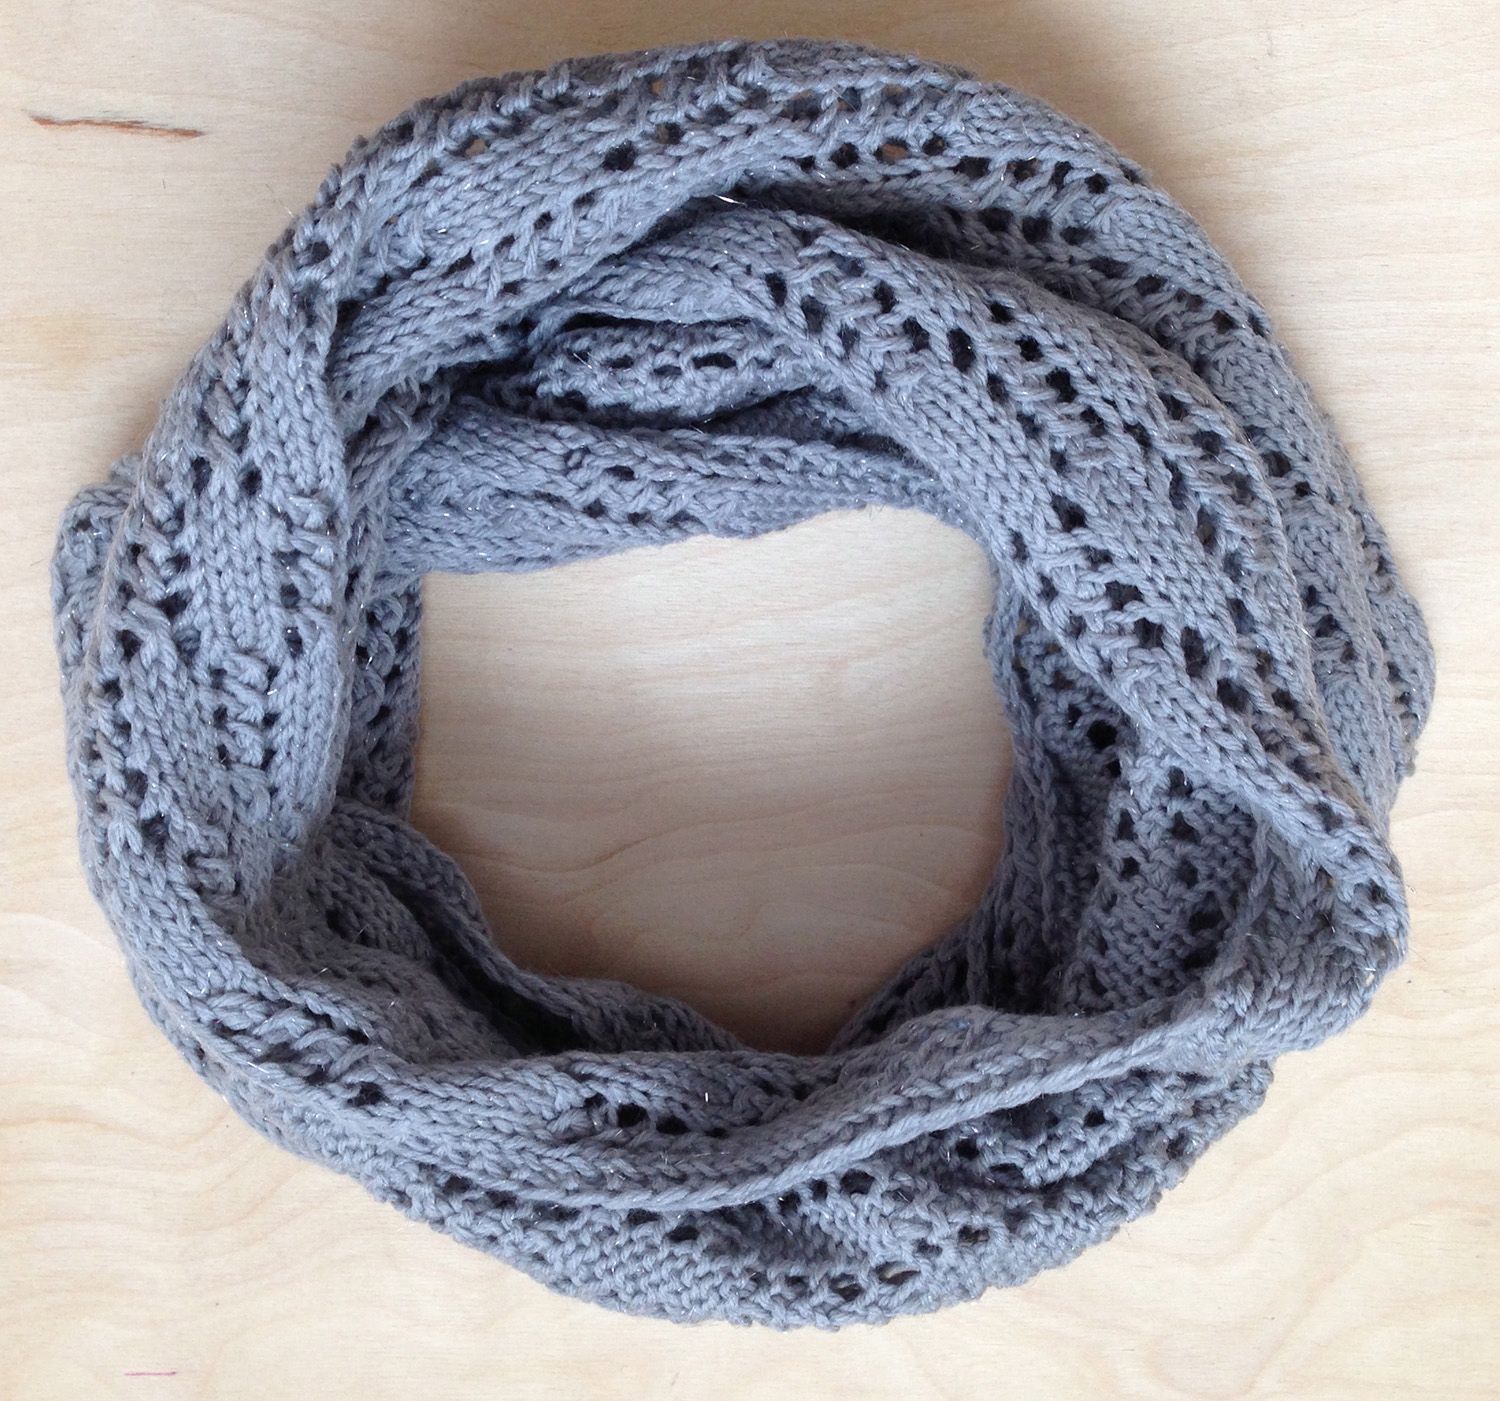 Simplicity Cowl Pattern - Knitting Patterns and Crochet ...